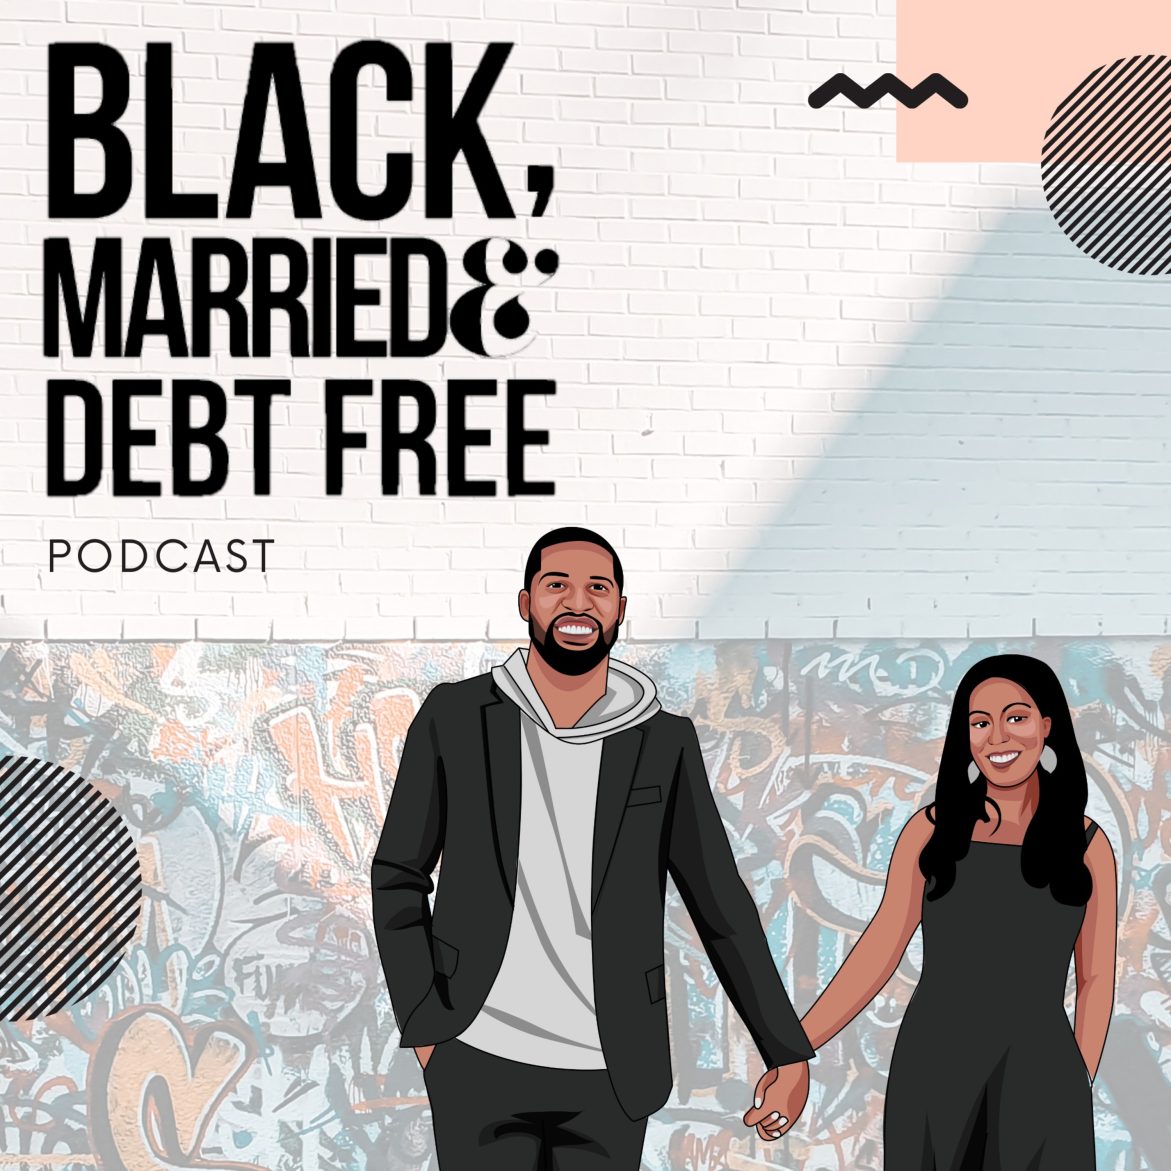 Black Podcasting - (EP - 287 NO MUSIC) IS CHAT GPT THE NEW FINANCIAL ADVISOR? 🤖 WE PUT IT TO THE TEST